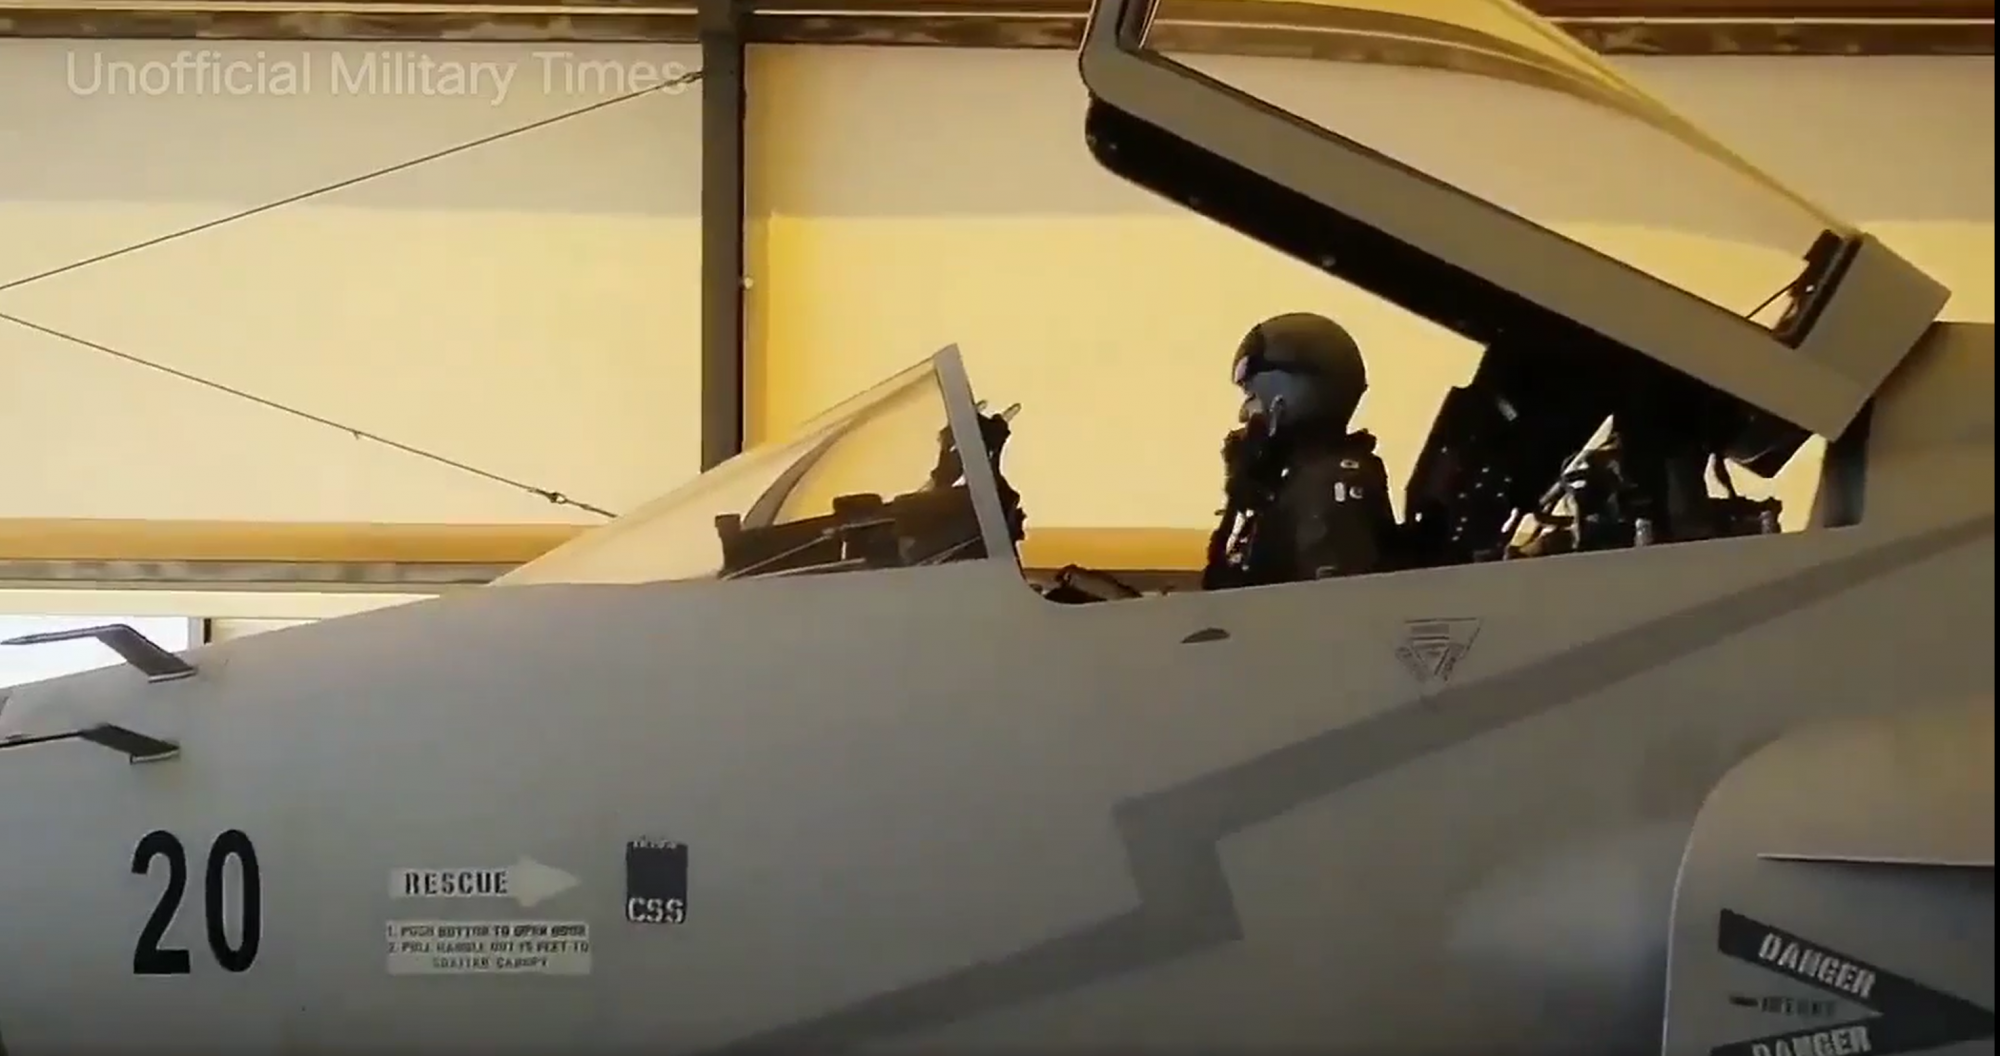 jf-17n 2.png